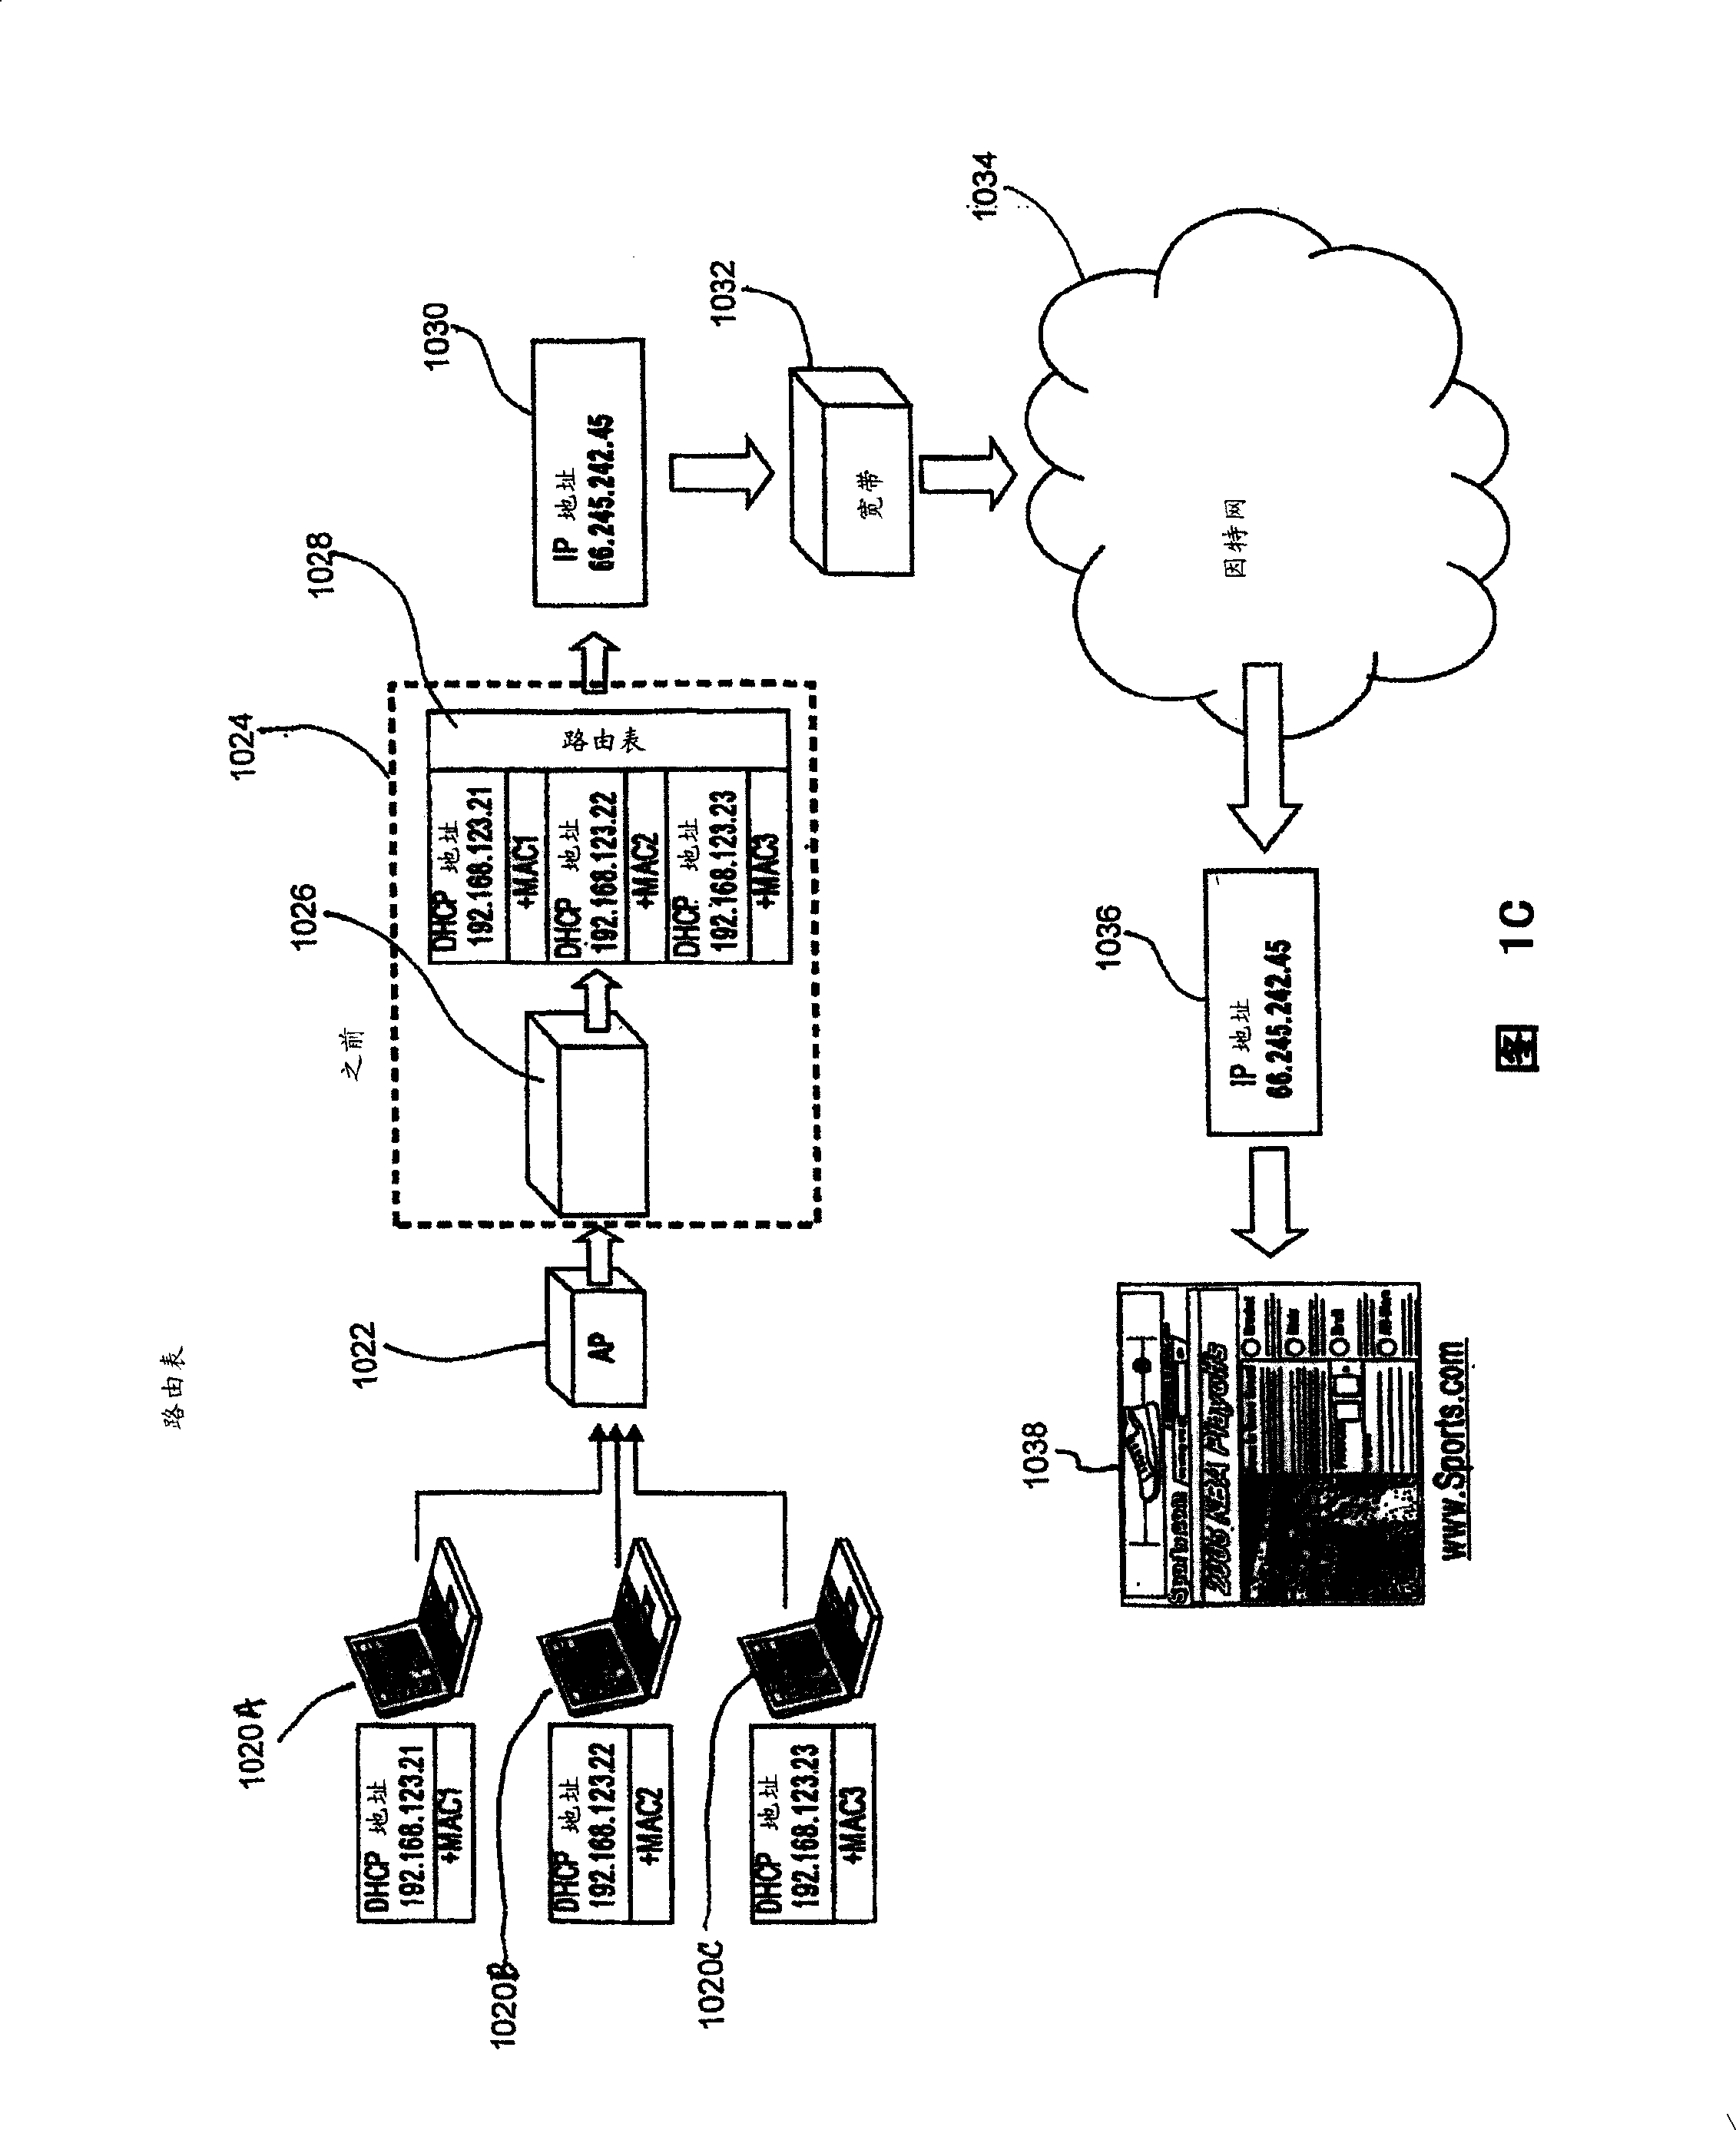 Systems and methods of network operation and information processing, including data acquisition, processing and provision and/or interoperability features